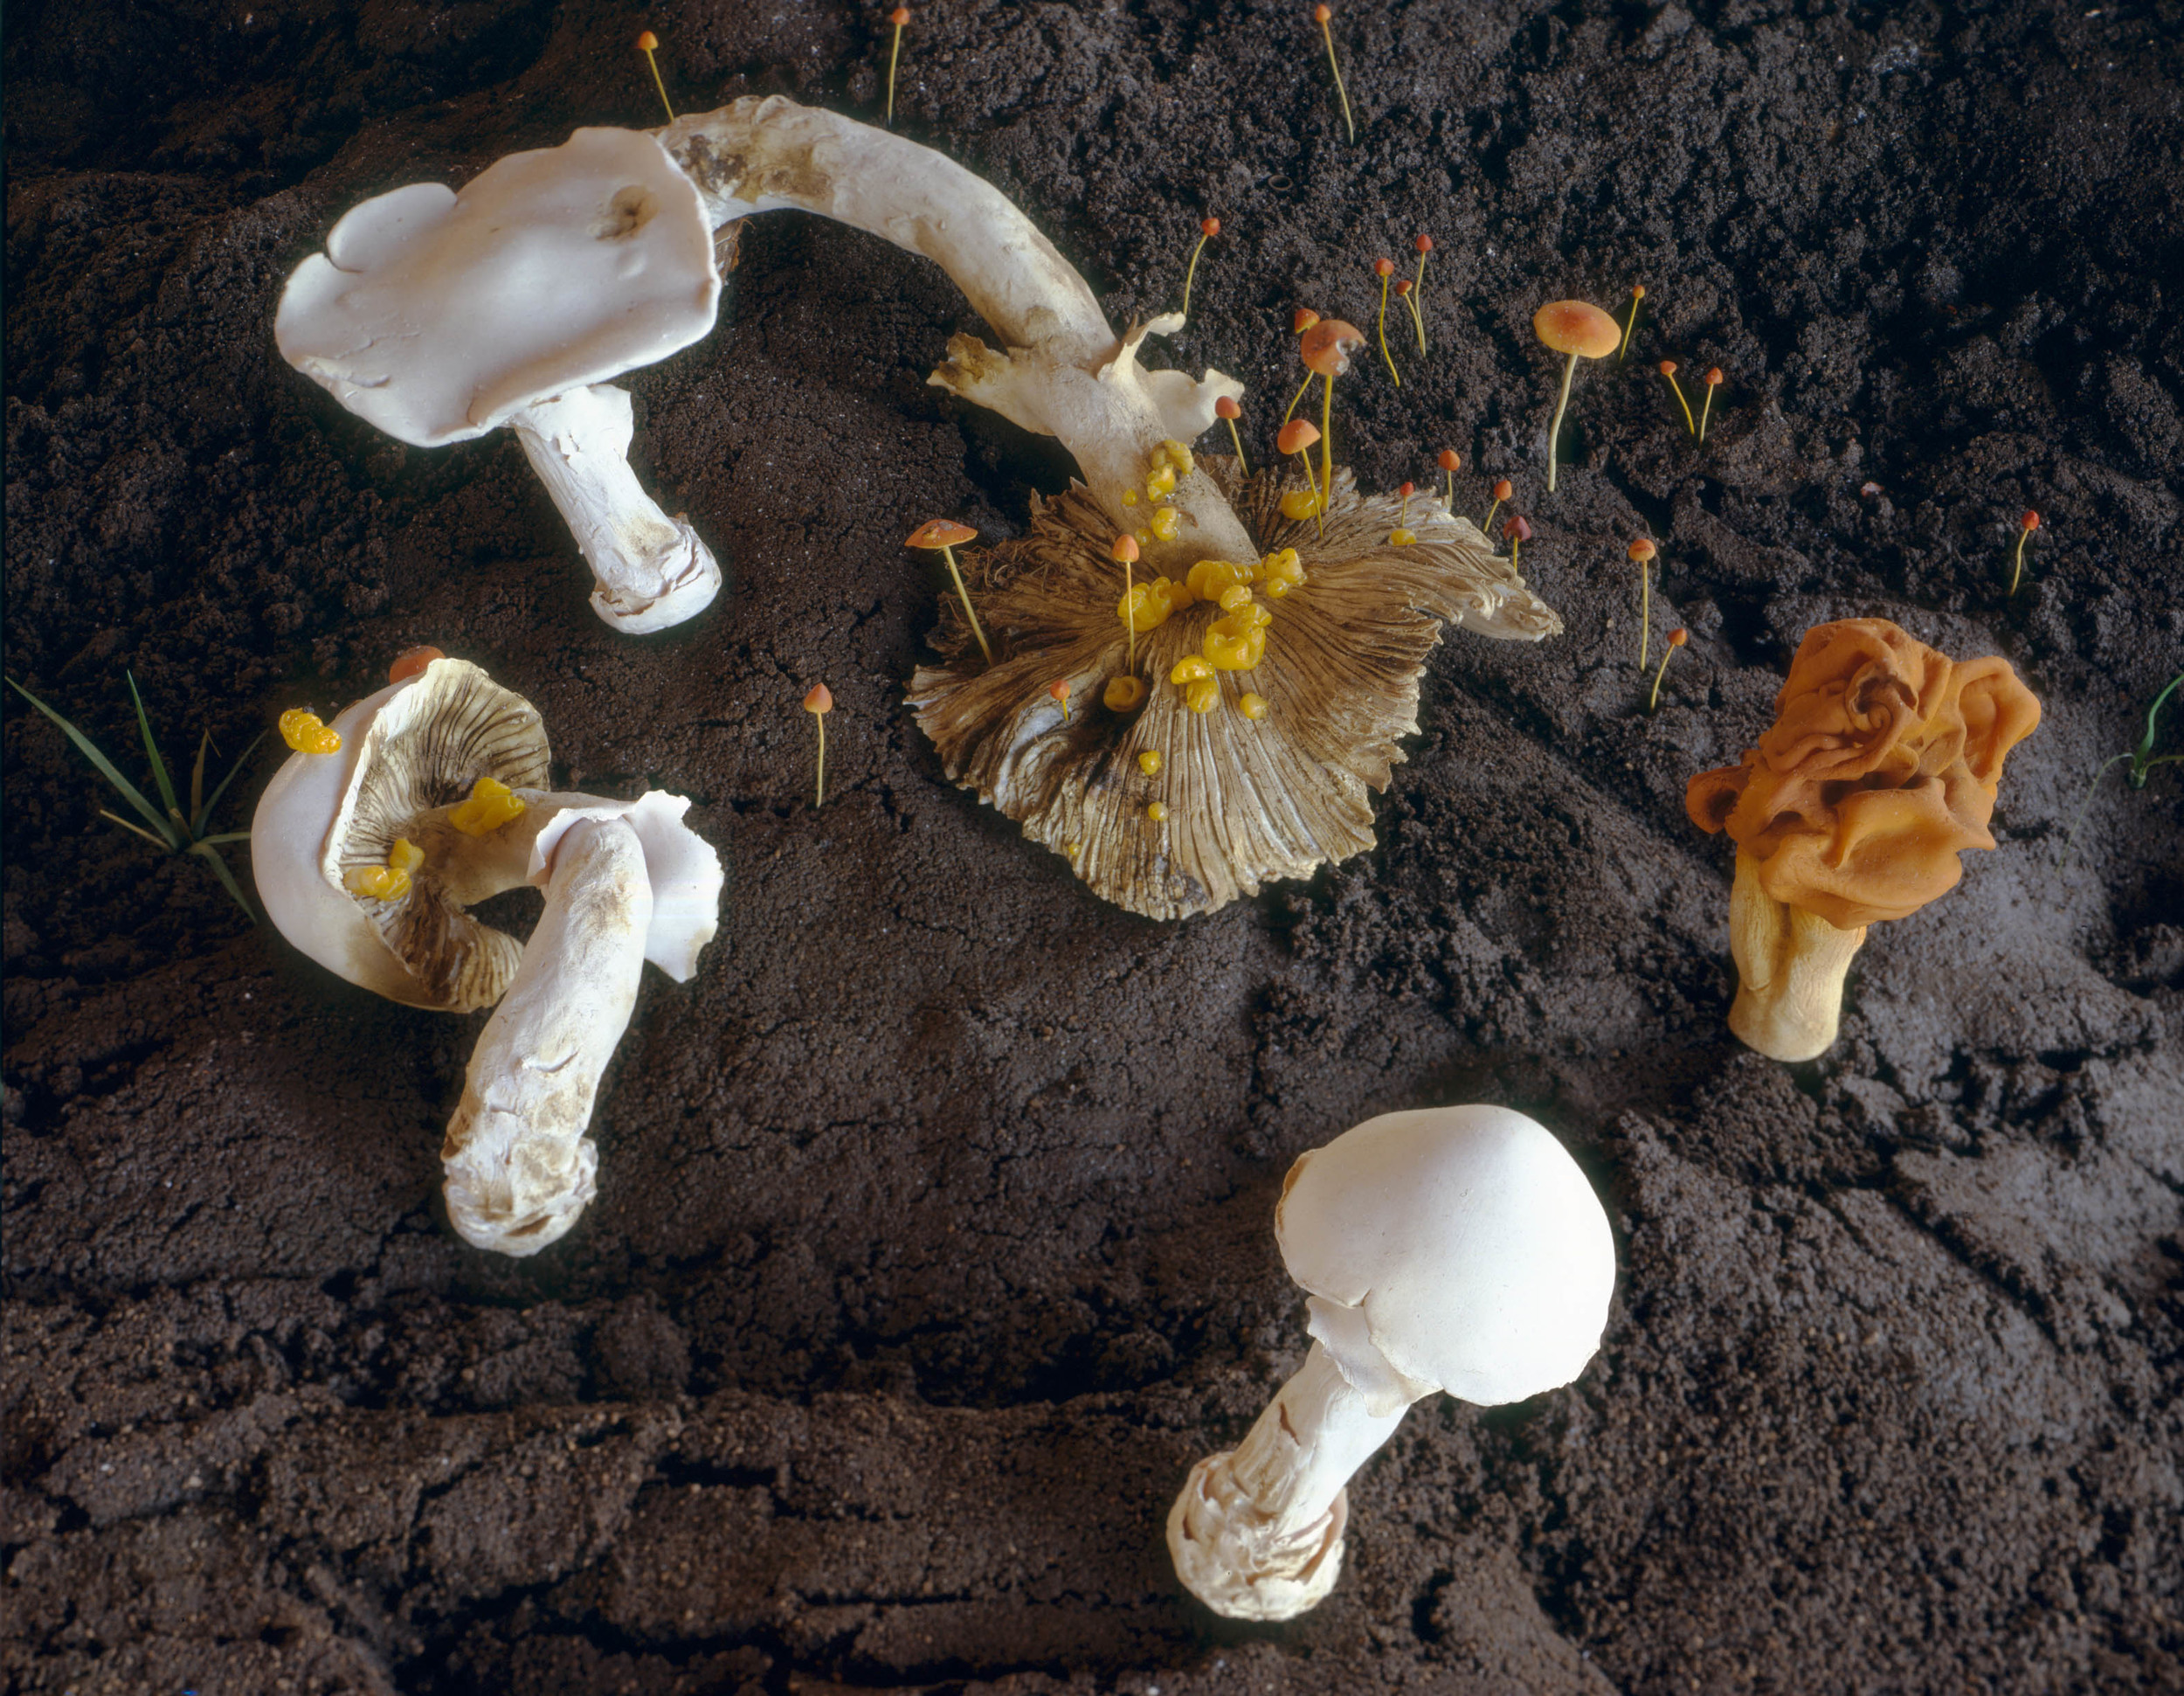  New Fungus Crop, 1999, Epoxy, thermoset polymer, aluminum, wood FETG, lacquer, oil paint, and earth, 35 x 84 x 108 inches 